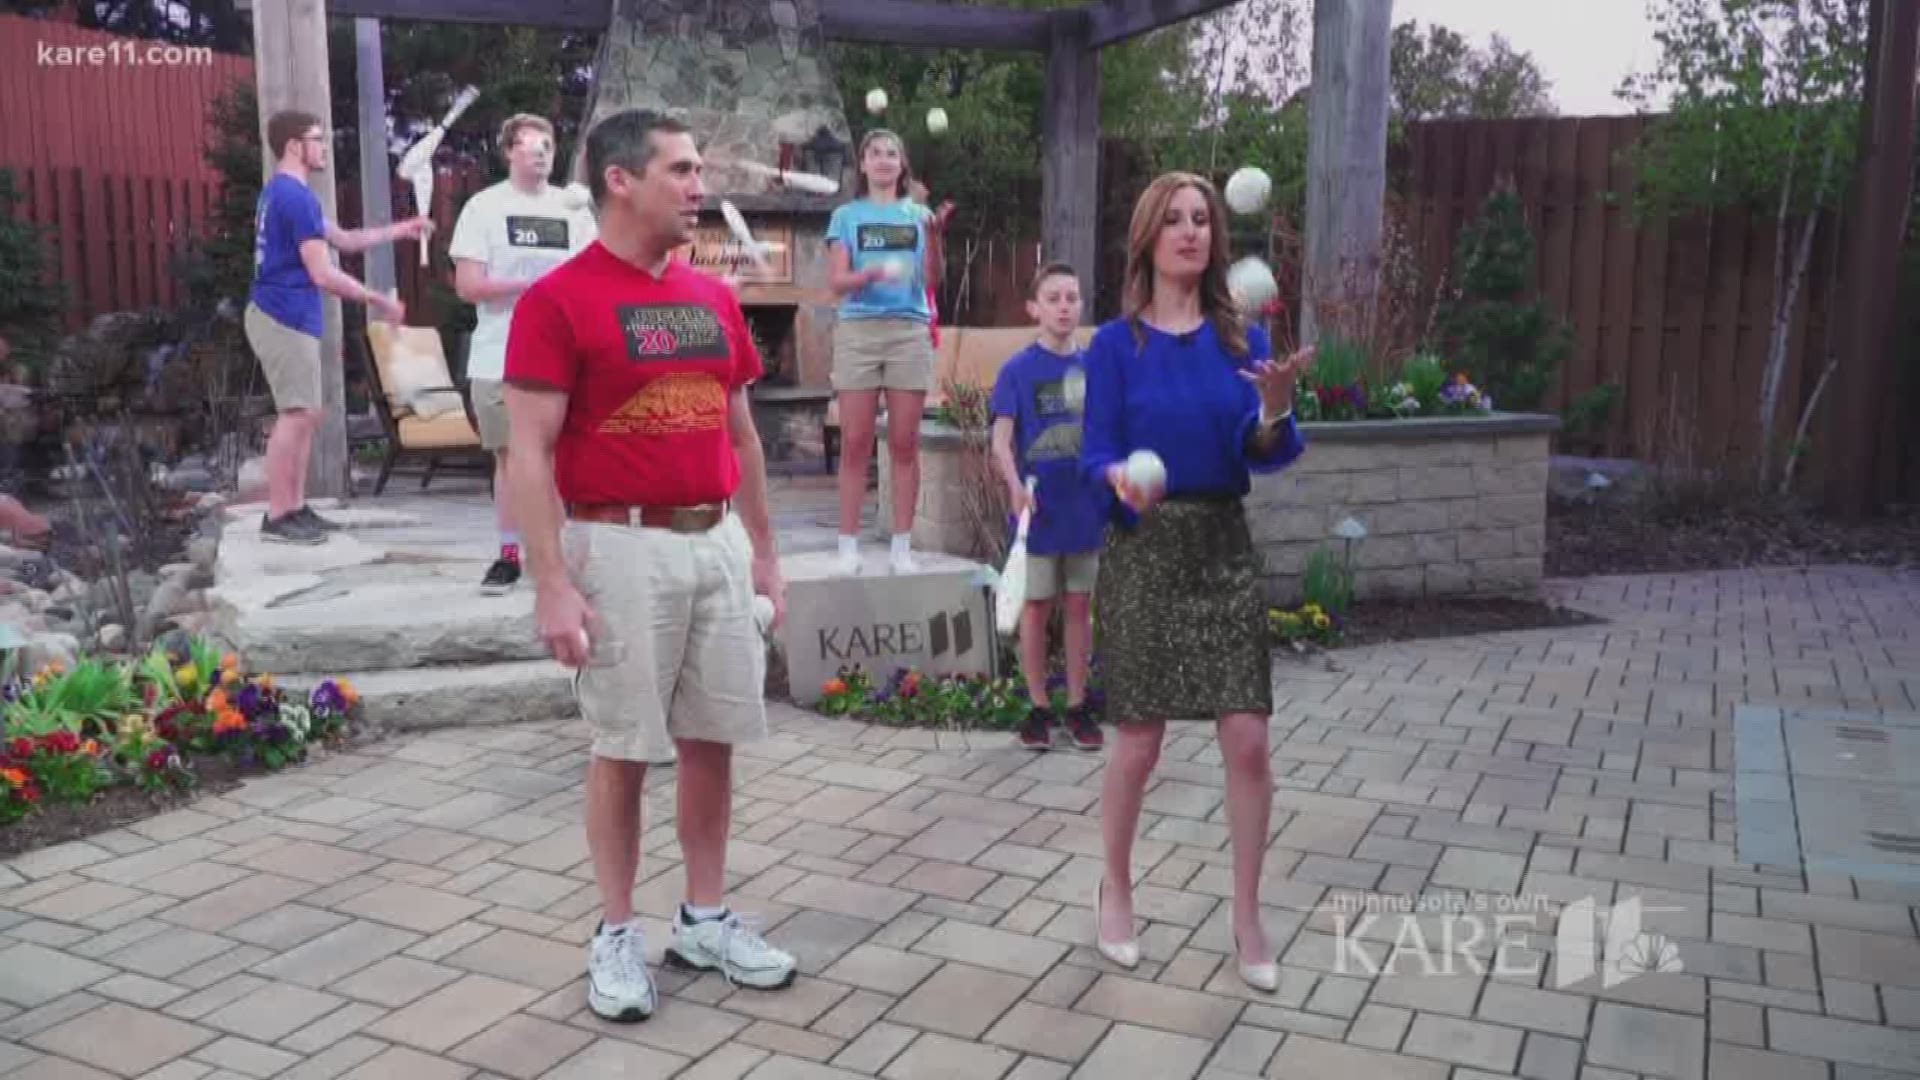 The world's biggest youth juggling group stopped by Sunrise and tried to teach Ellery how to juggle.